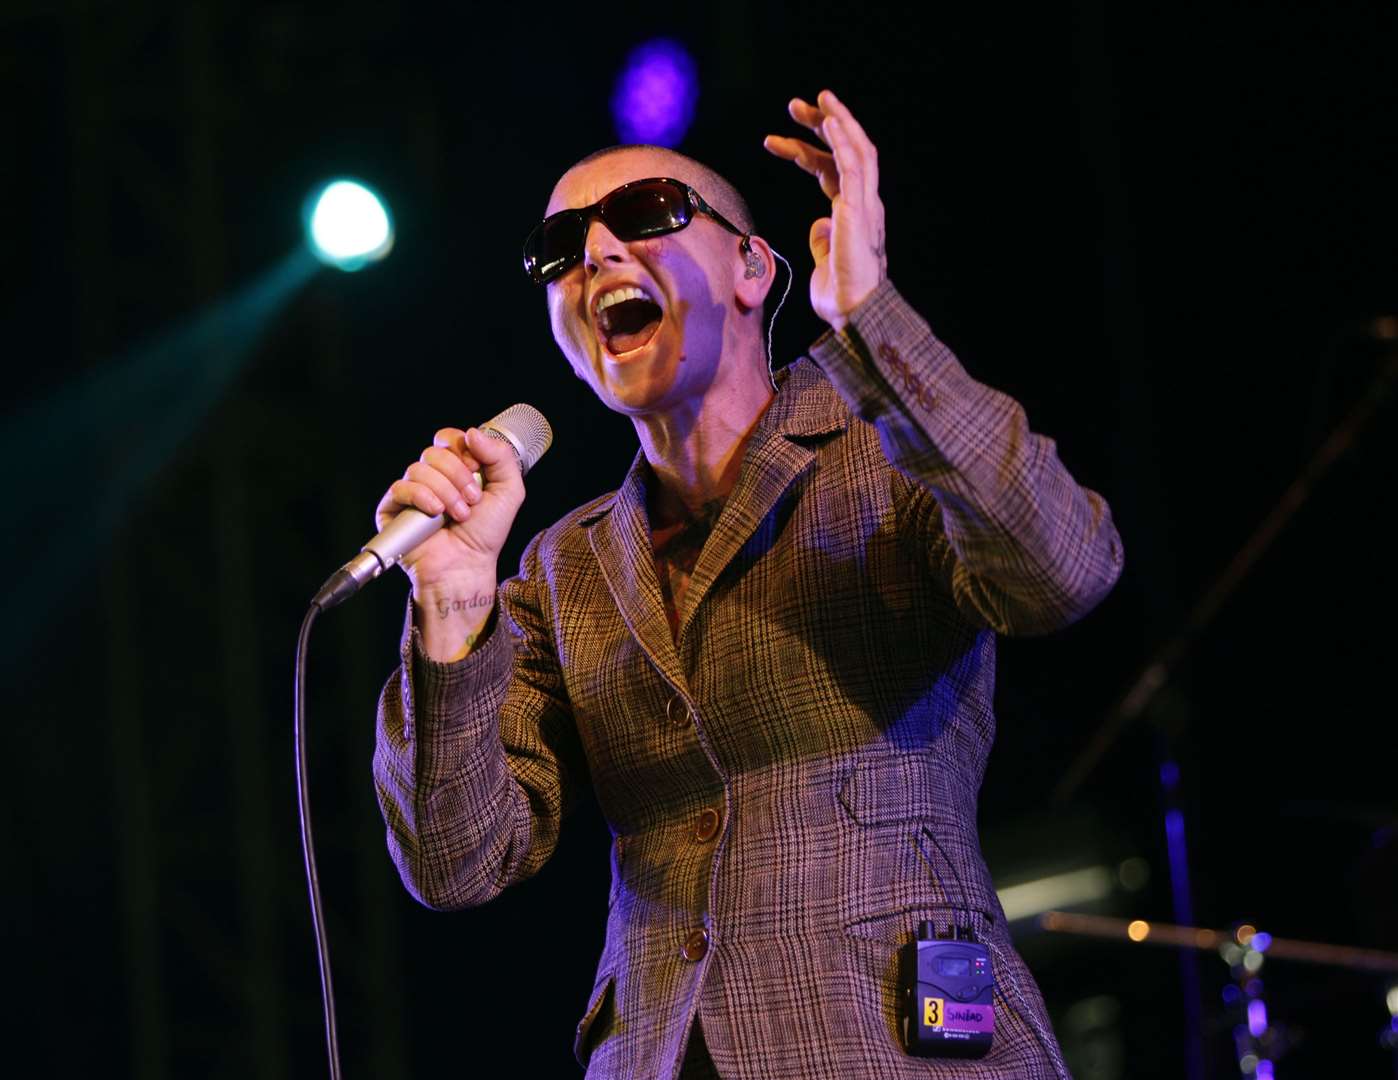 Sinead O’Connor performing in the Big Top stage at Bestival, 2013 (Yui Mok/PA)